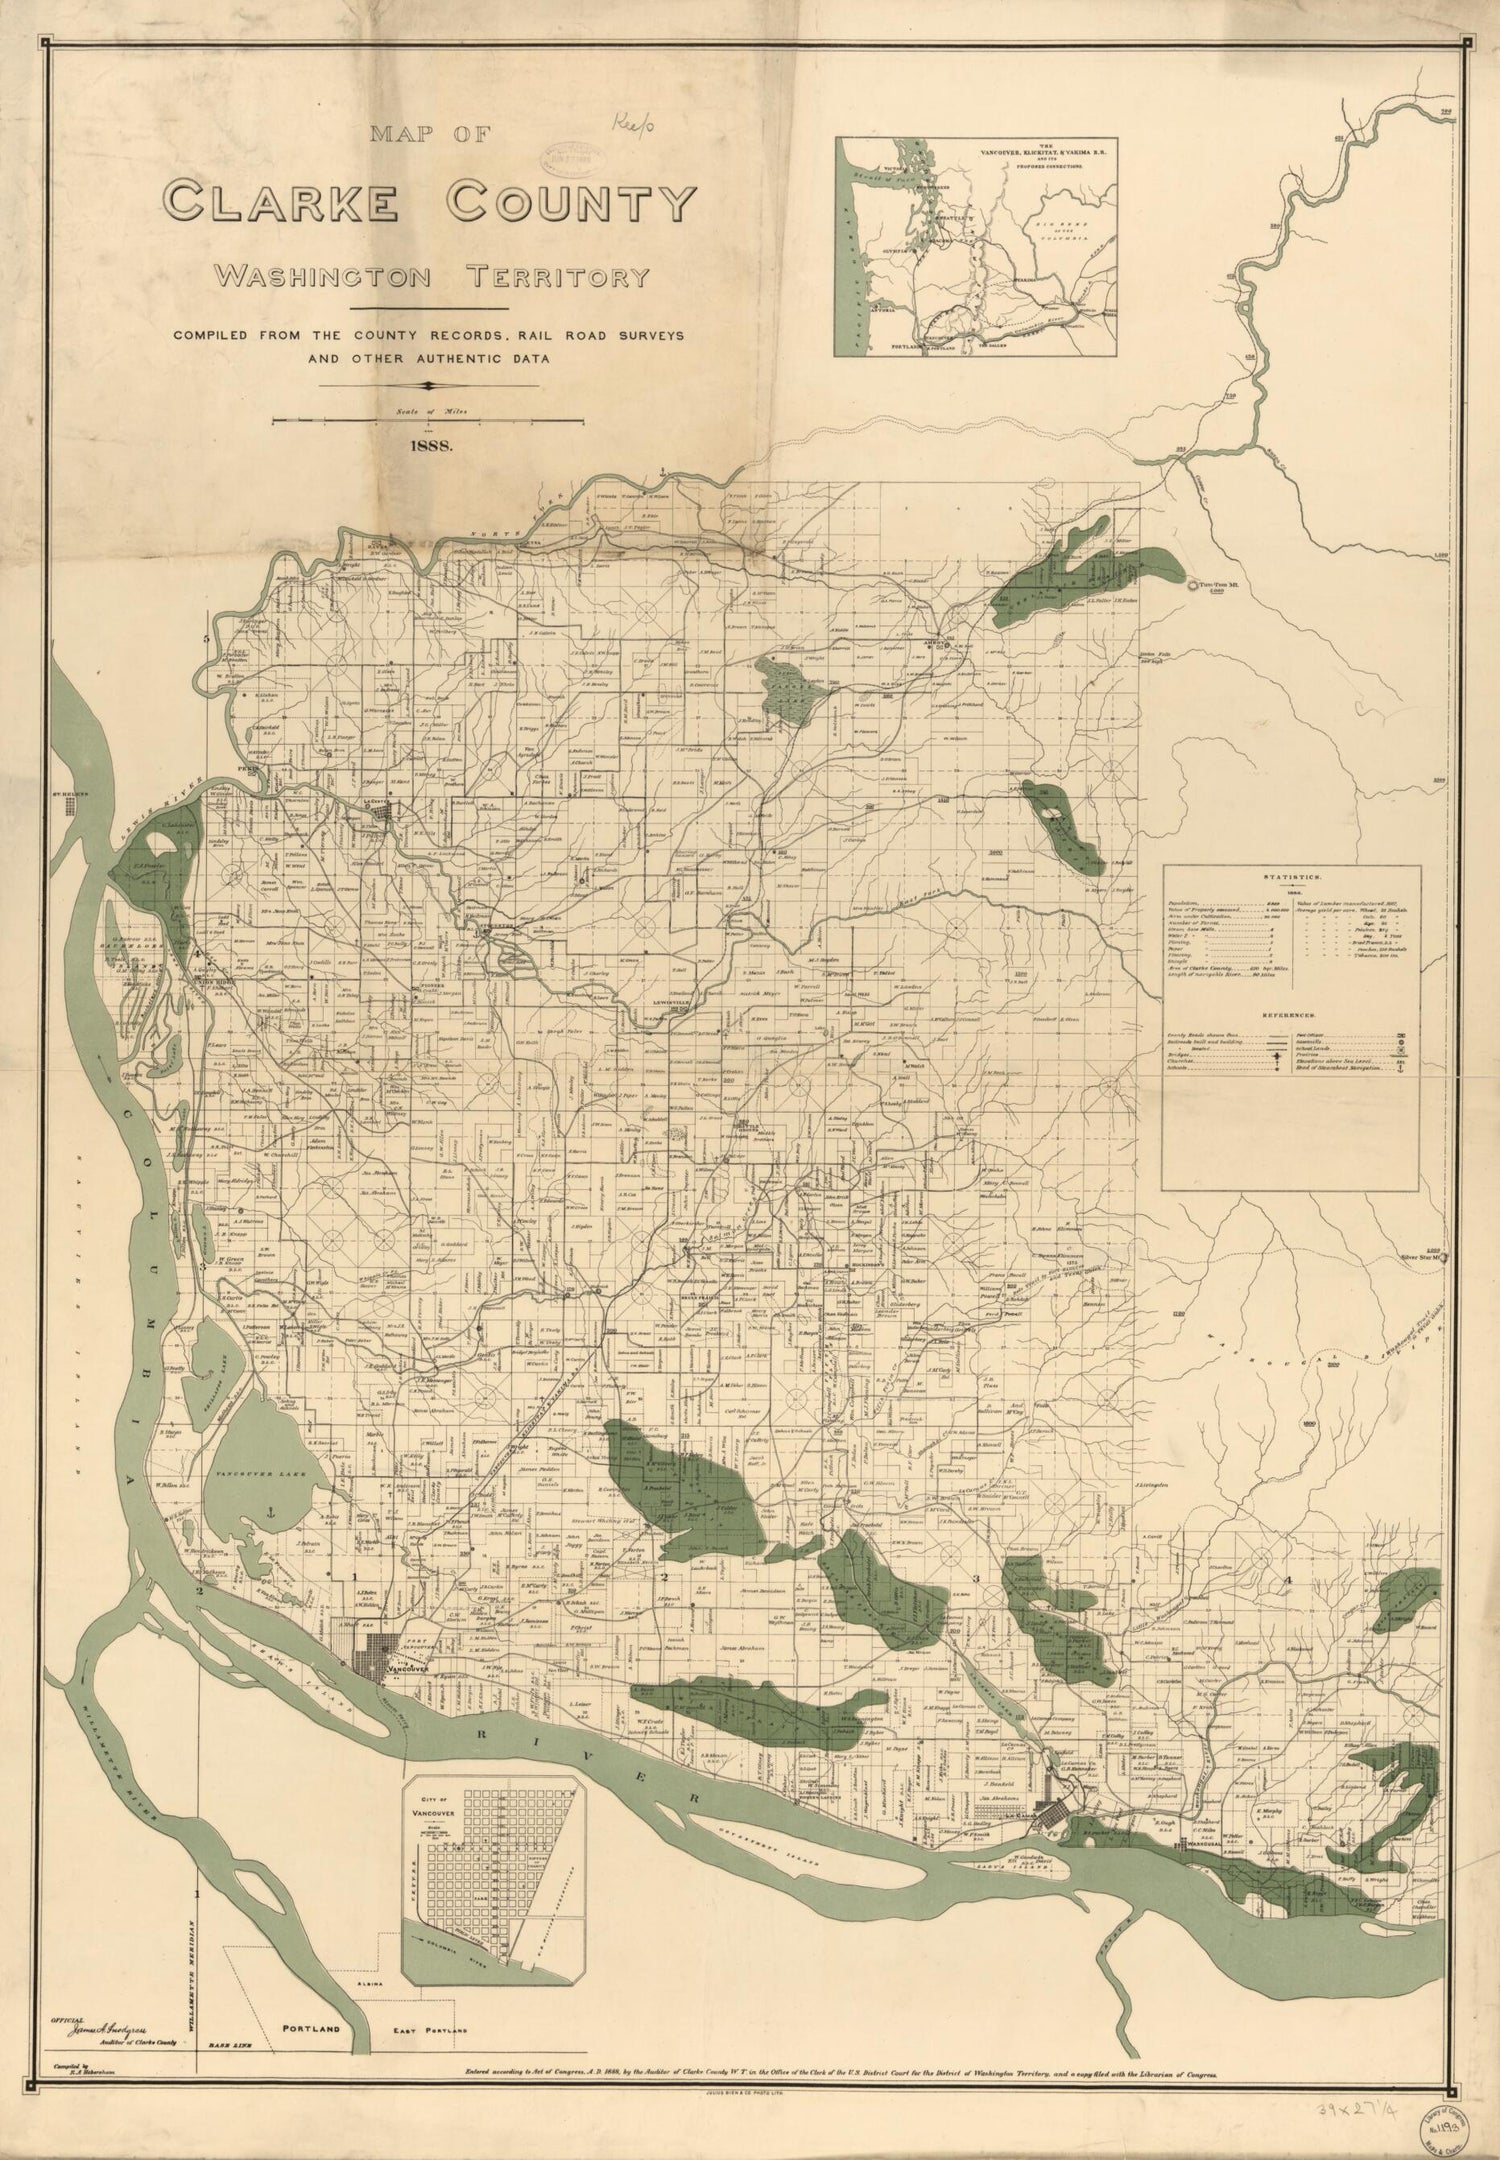 This old map of Map of Clarke County, Washington Territory : Compiled from the County Records, Rail Road Surveys, and Other Authentic Data from 1888 was created by Robert A. Habersham,  Julius Bien &amp; Co in 1888